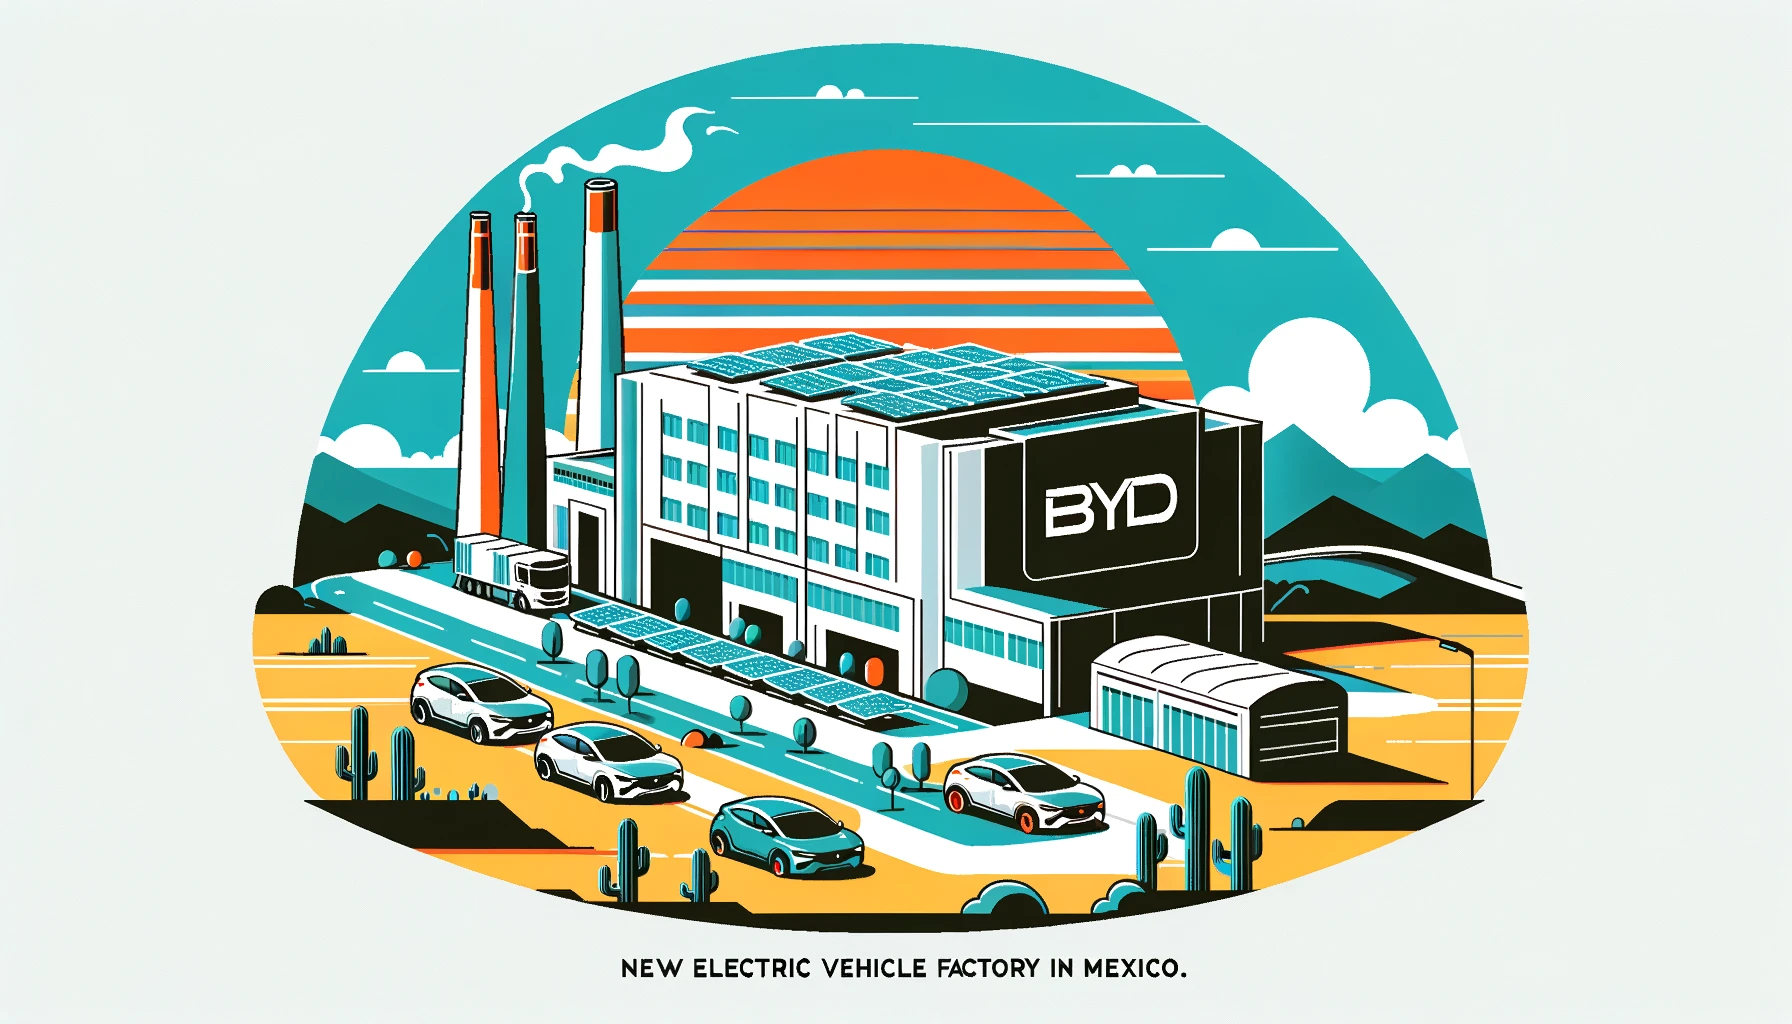 BYD of China is set to establish a new and big electric vehicle factory in Mexico, according to Nikkei.